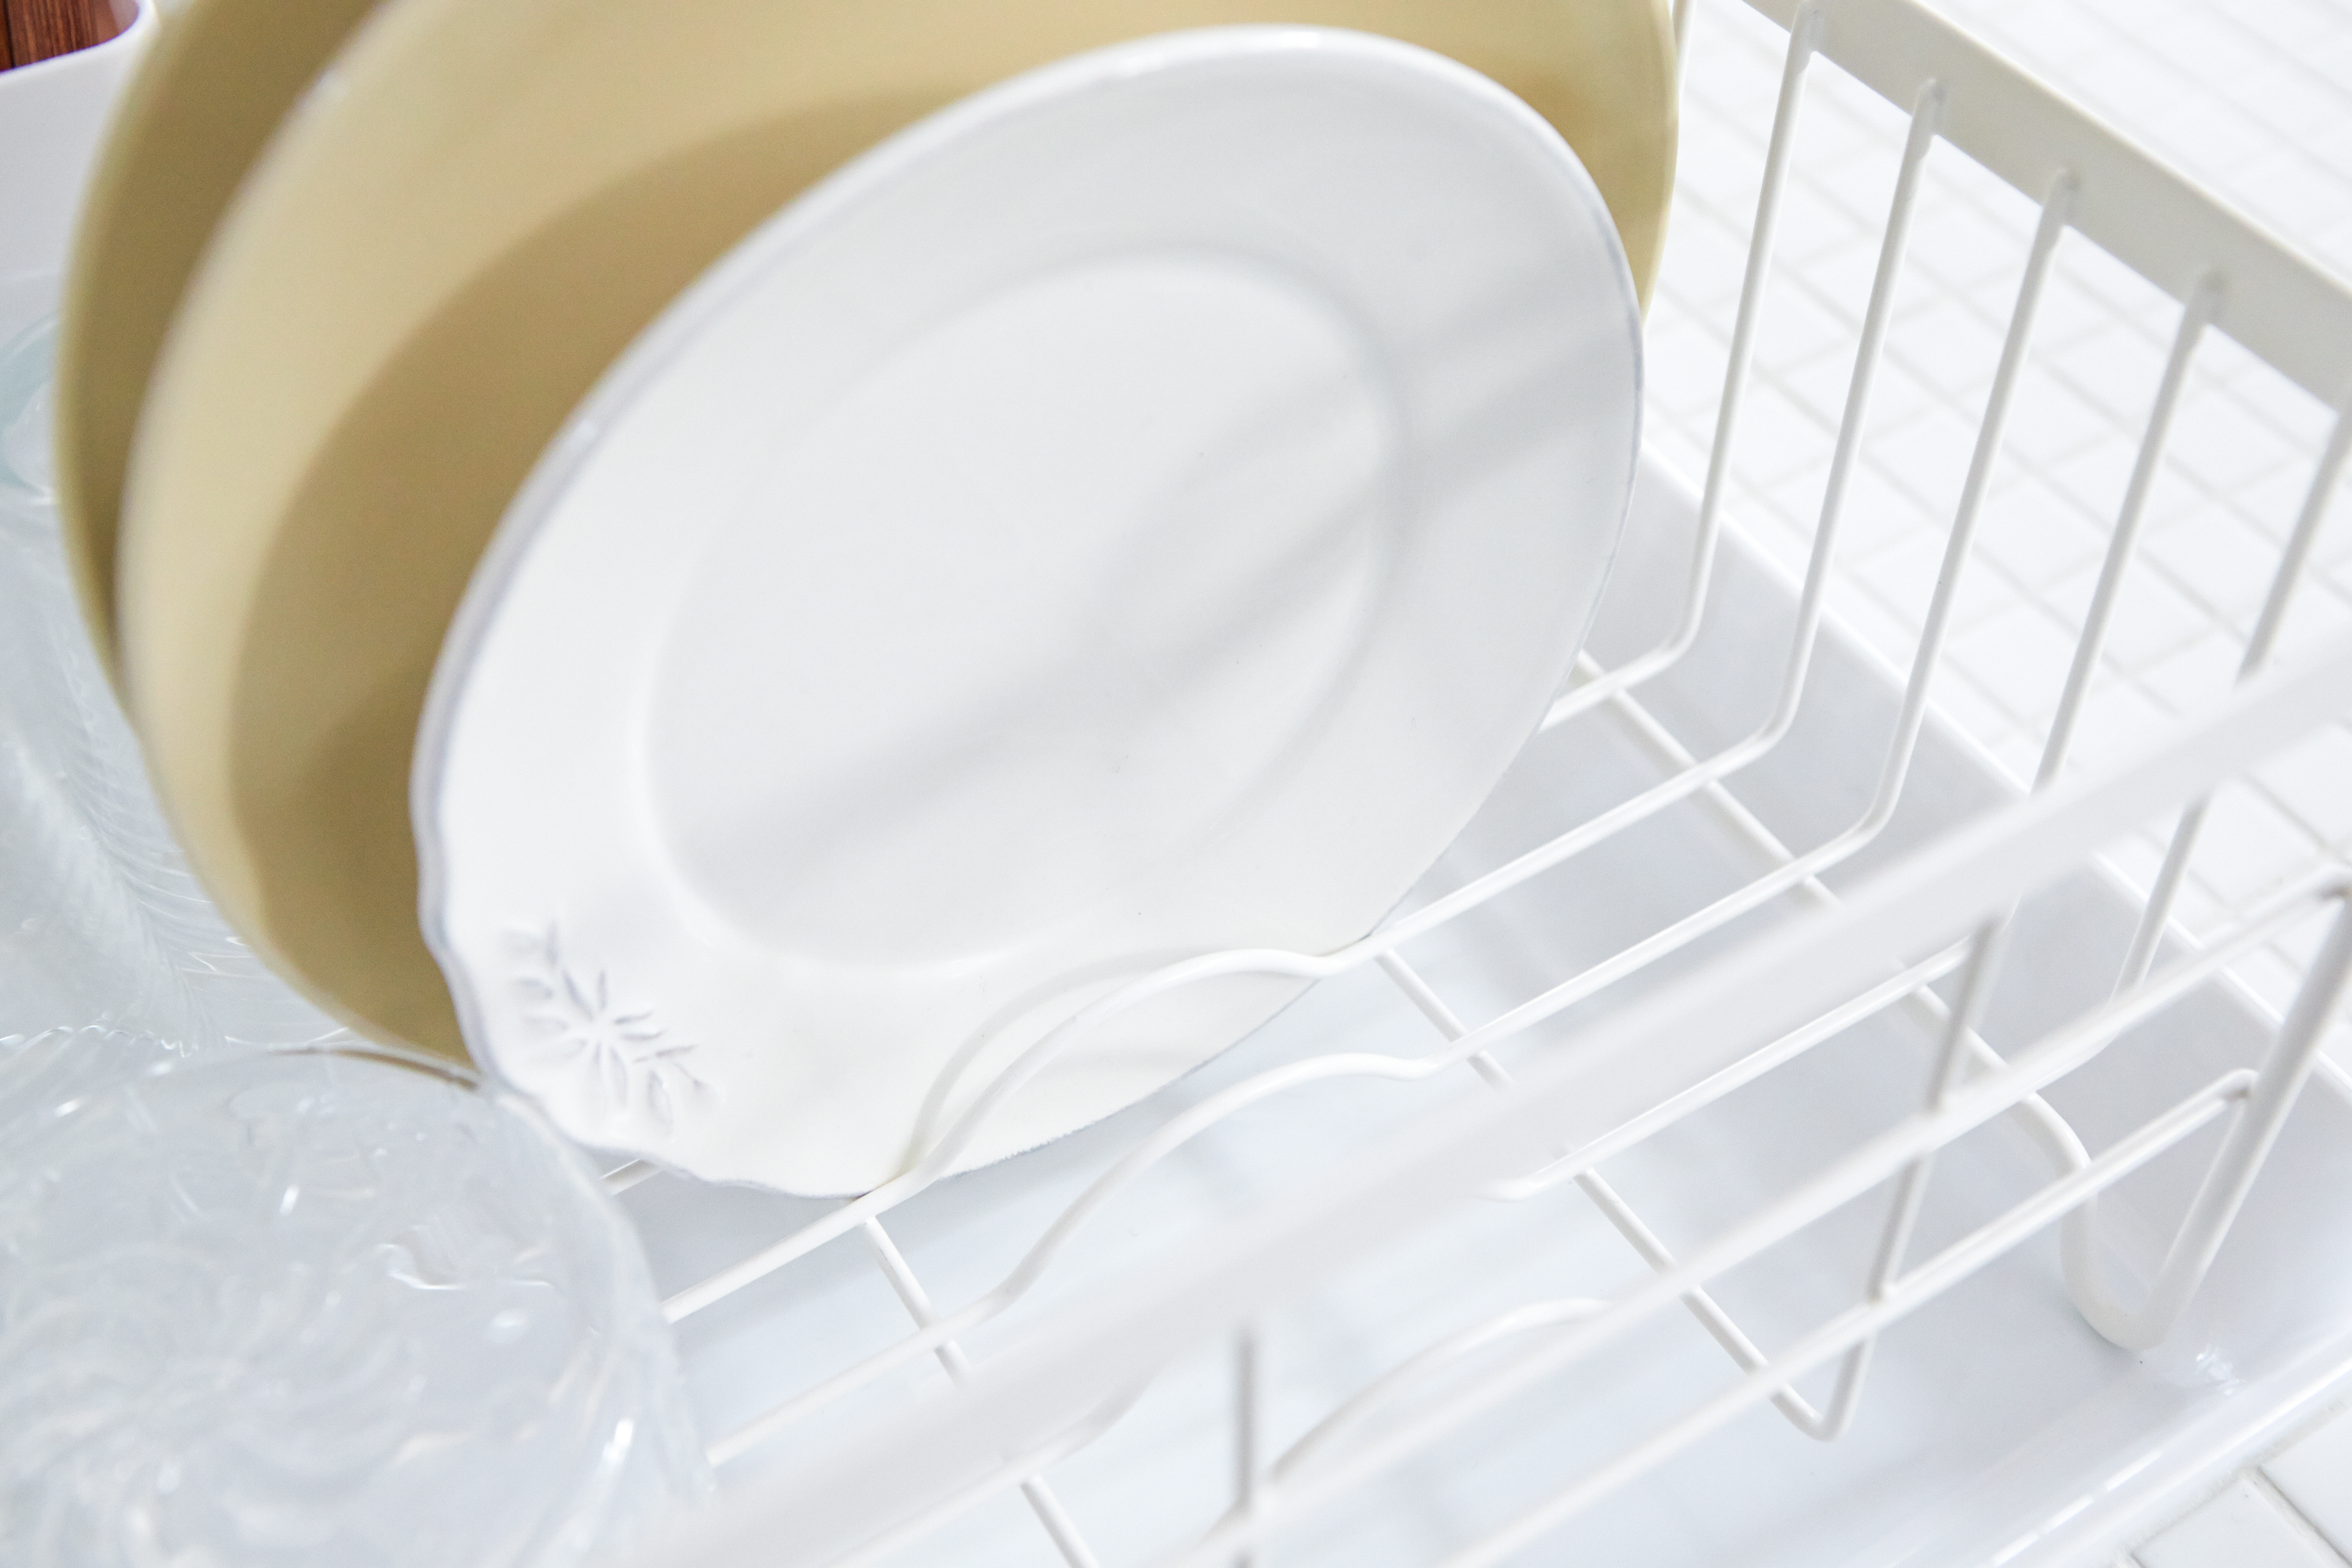 Close up aerial view of white Dish Rack holding plates and cups by Yamazaki Home.